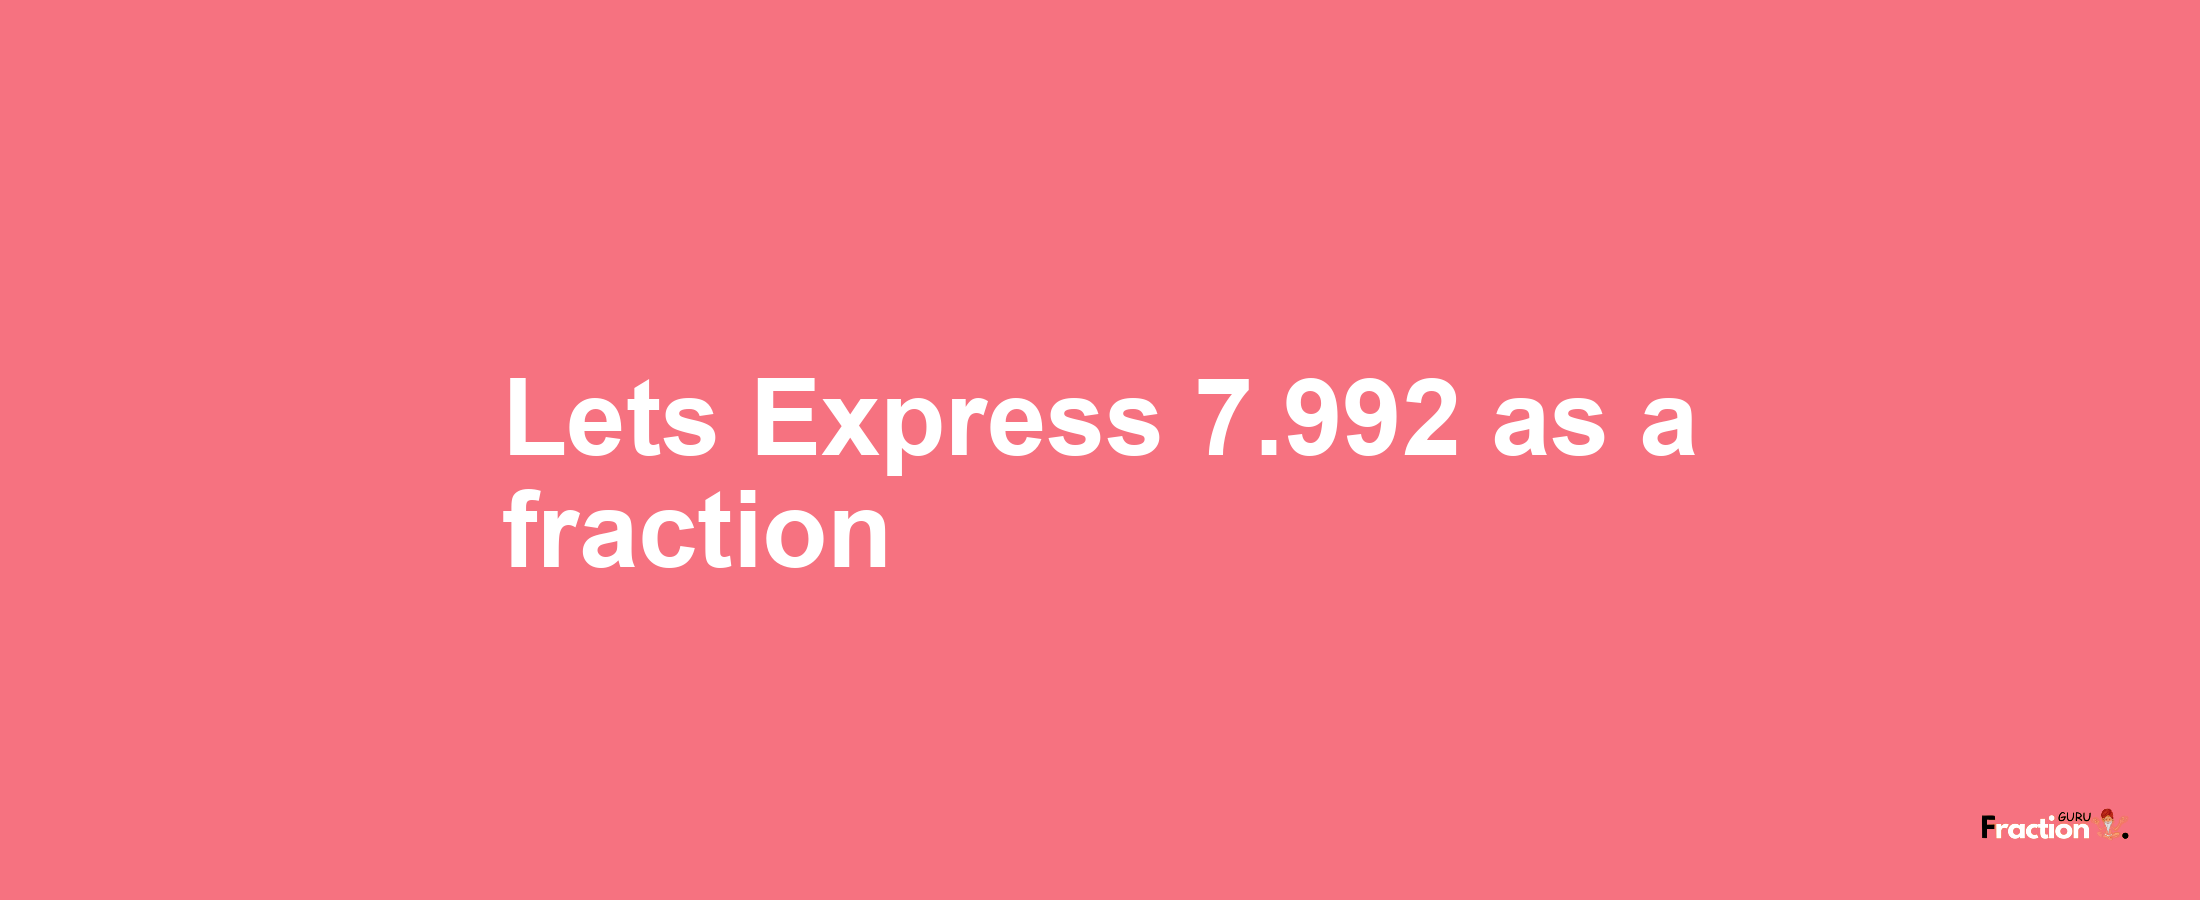 Lets Express 7.992 as afraction